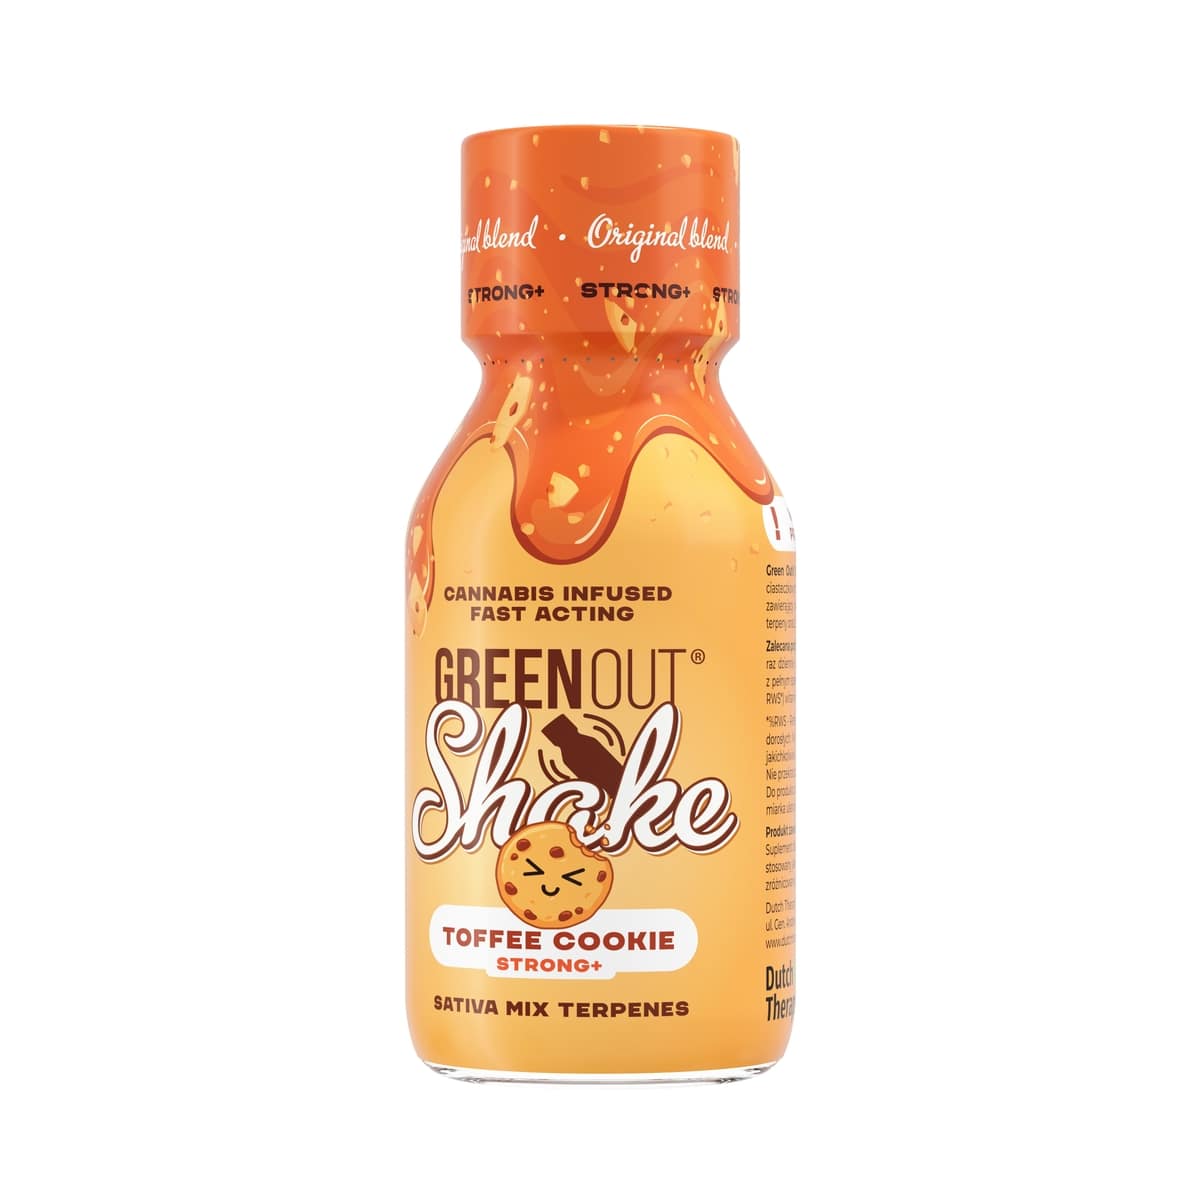 Green Out Shake Toffee Cookie